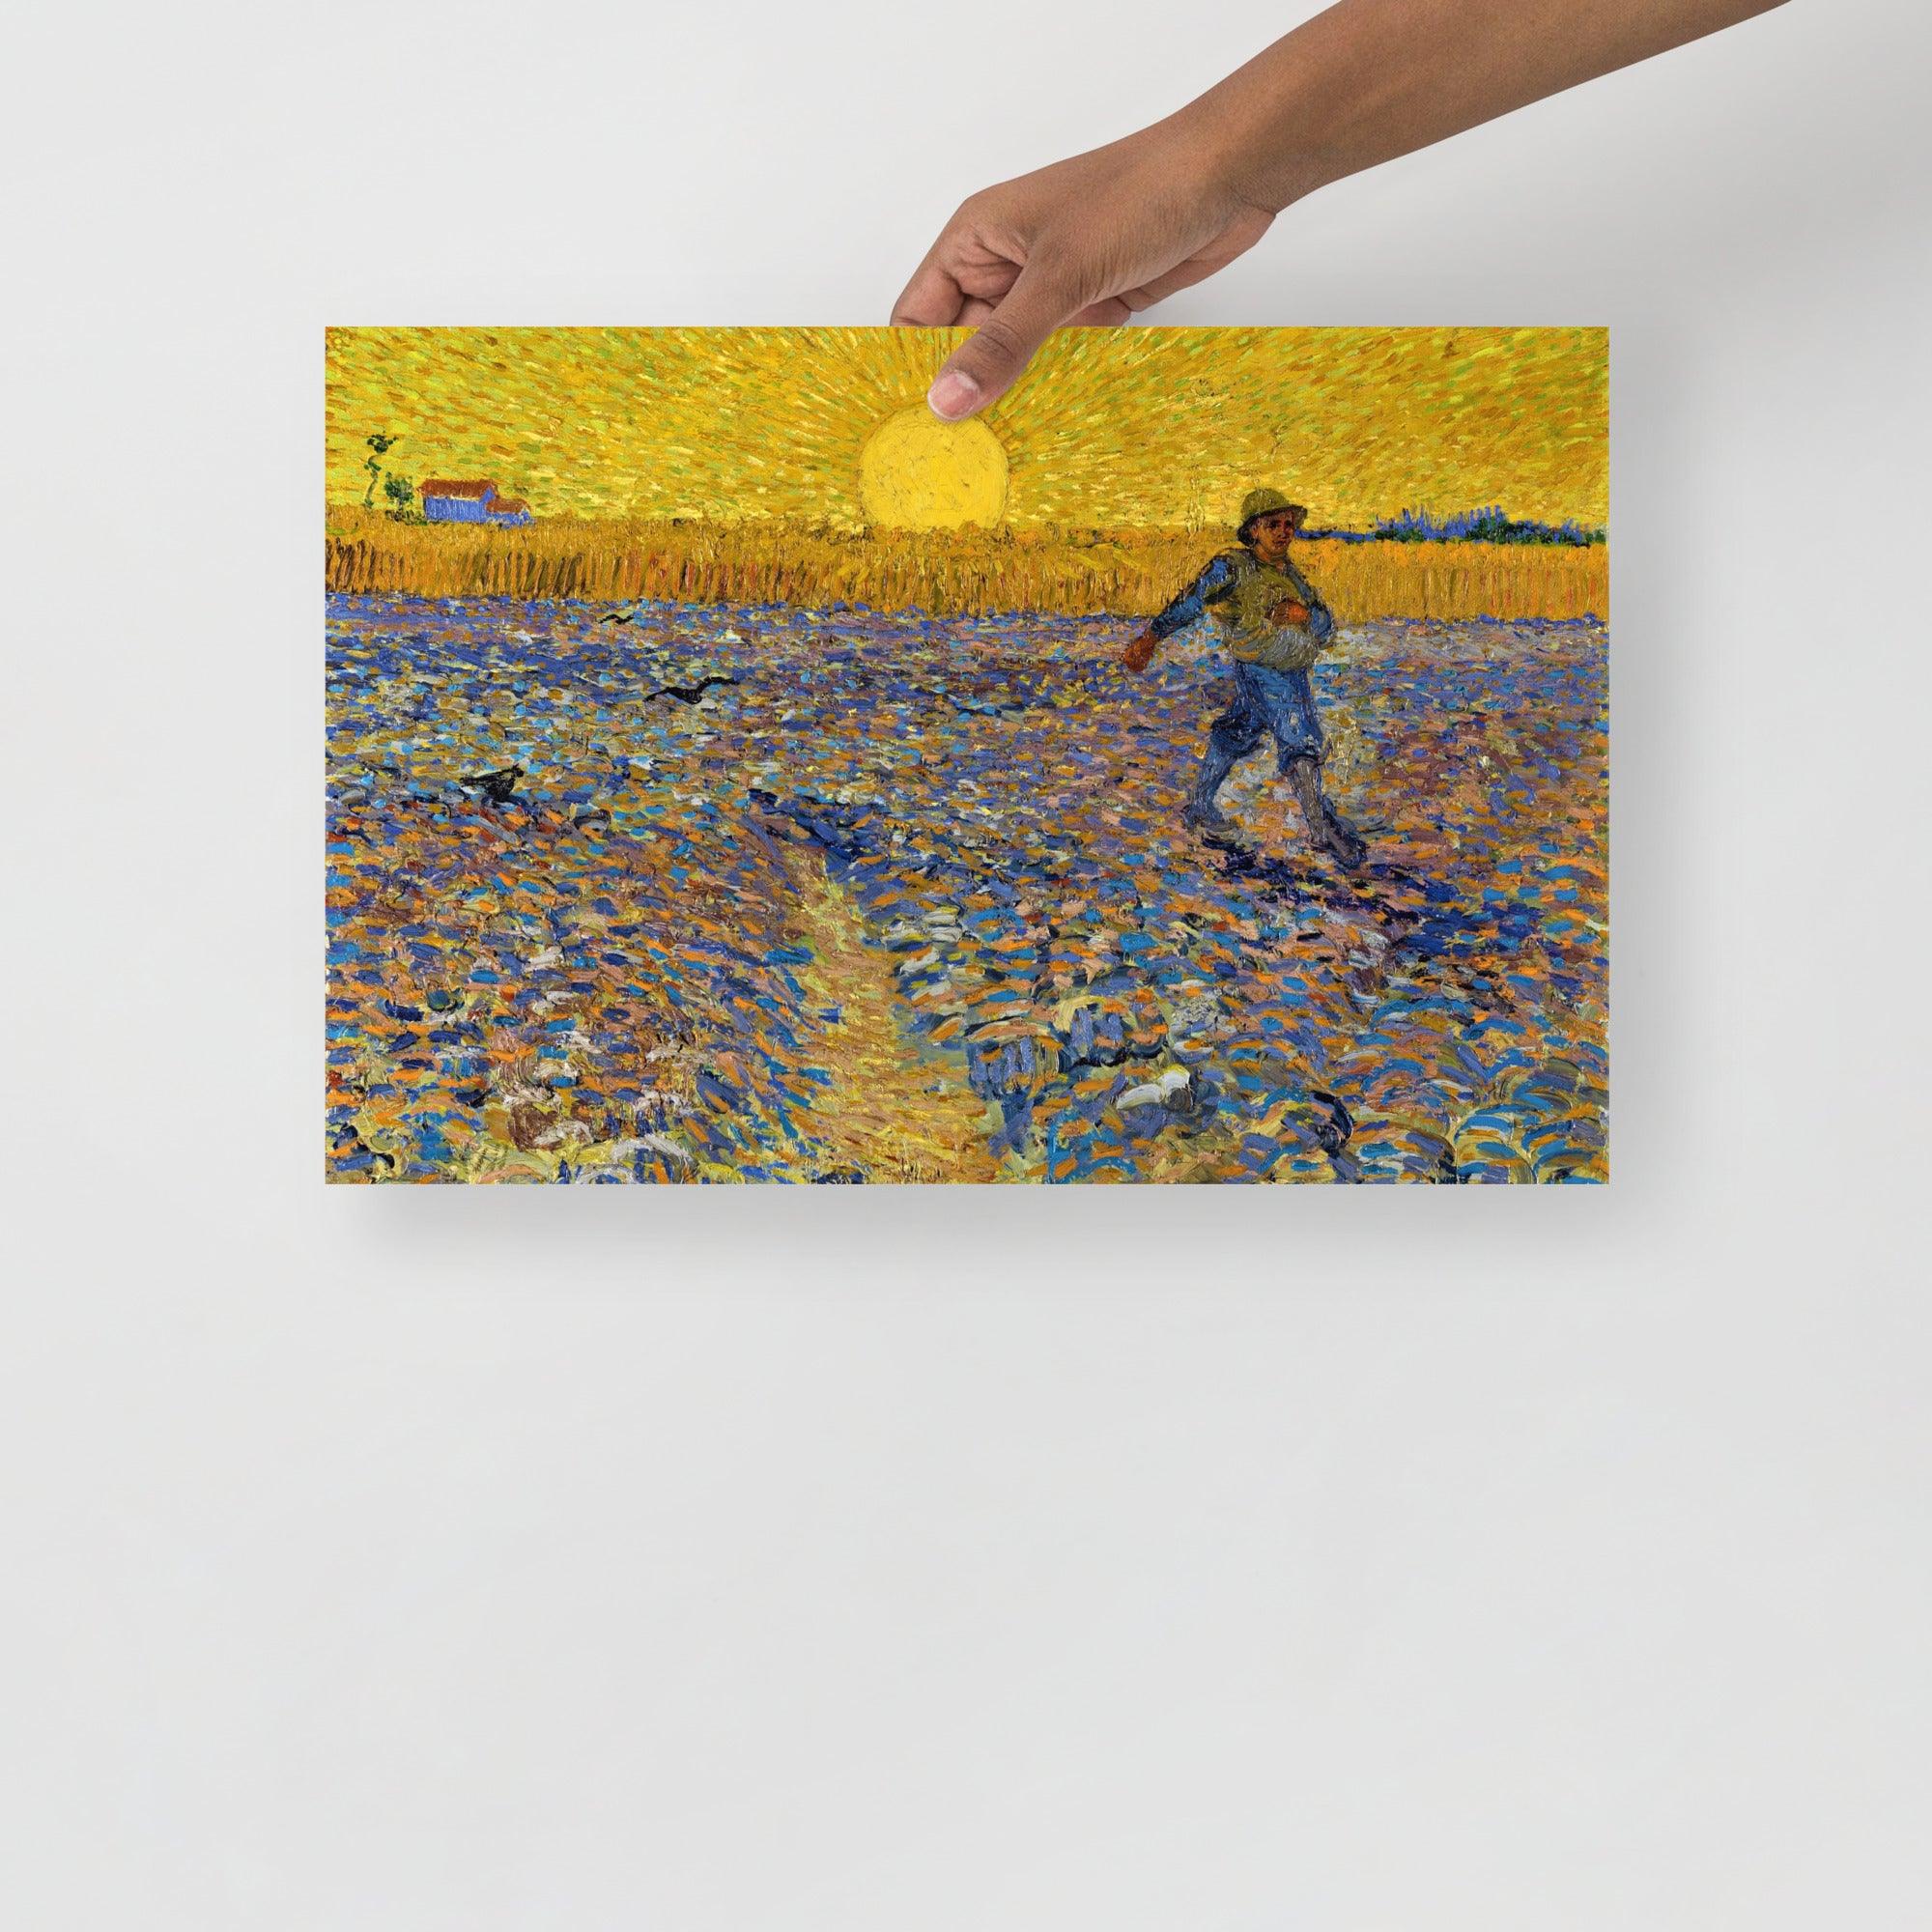 The Sower by Vincent Van Gogh poster on a plain backdrop in size12x18”.